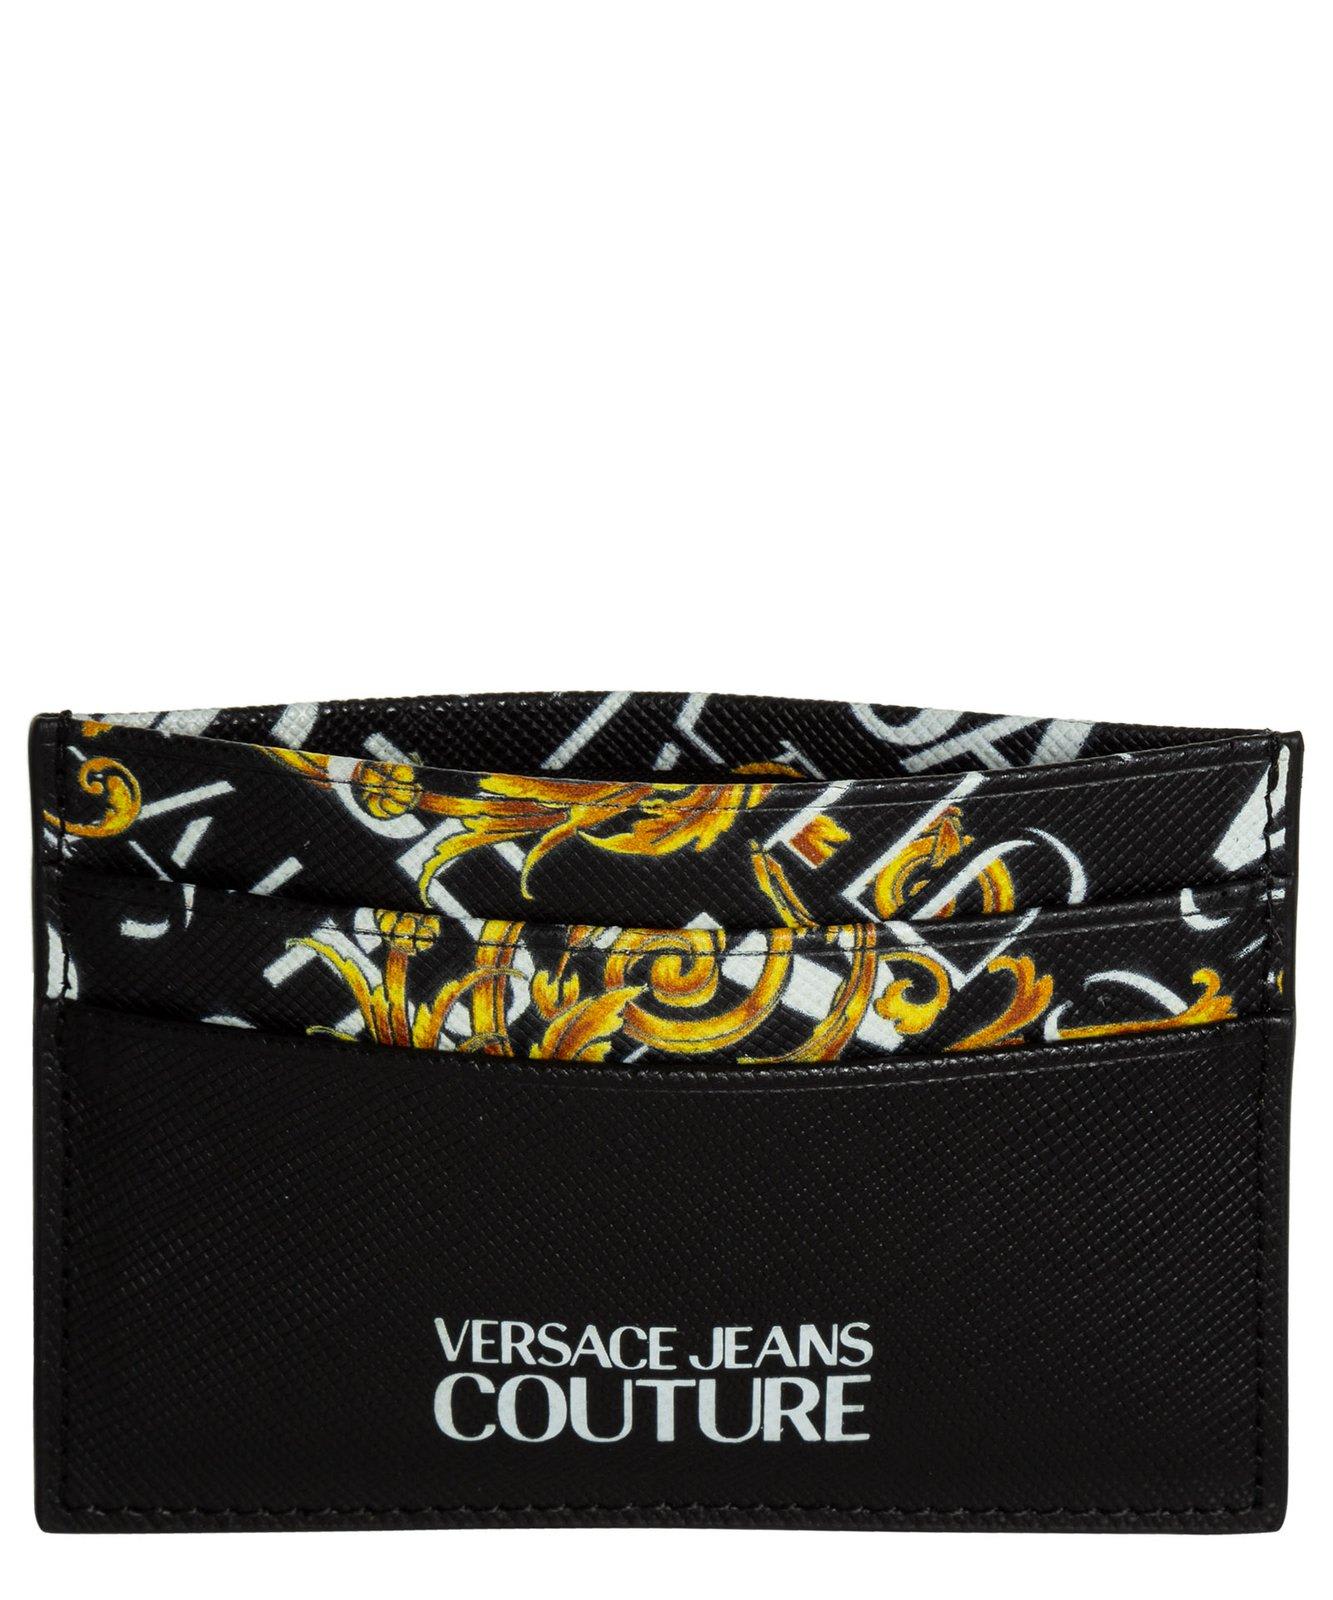 Versace Jeans Couture Logo Printed Cardholder